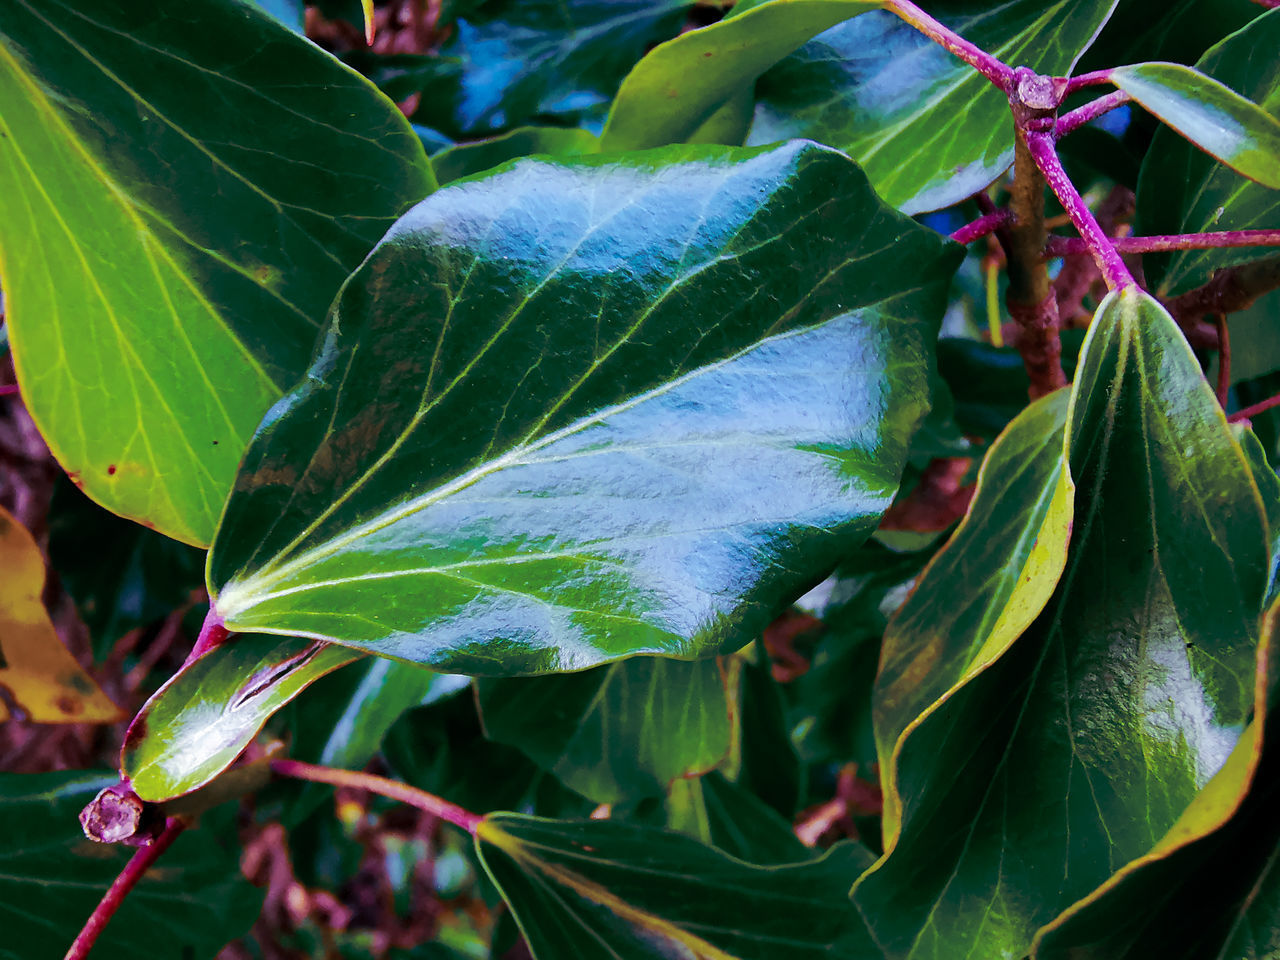 CLOSE-UP OF LEAVES